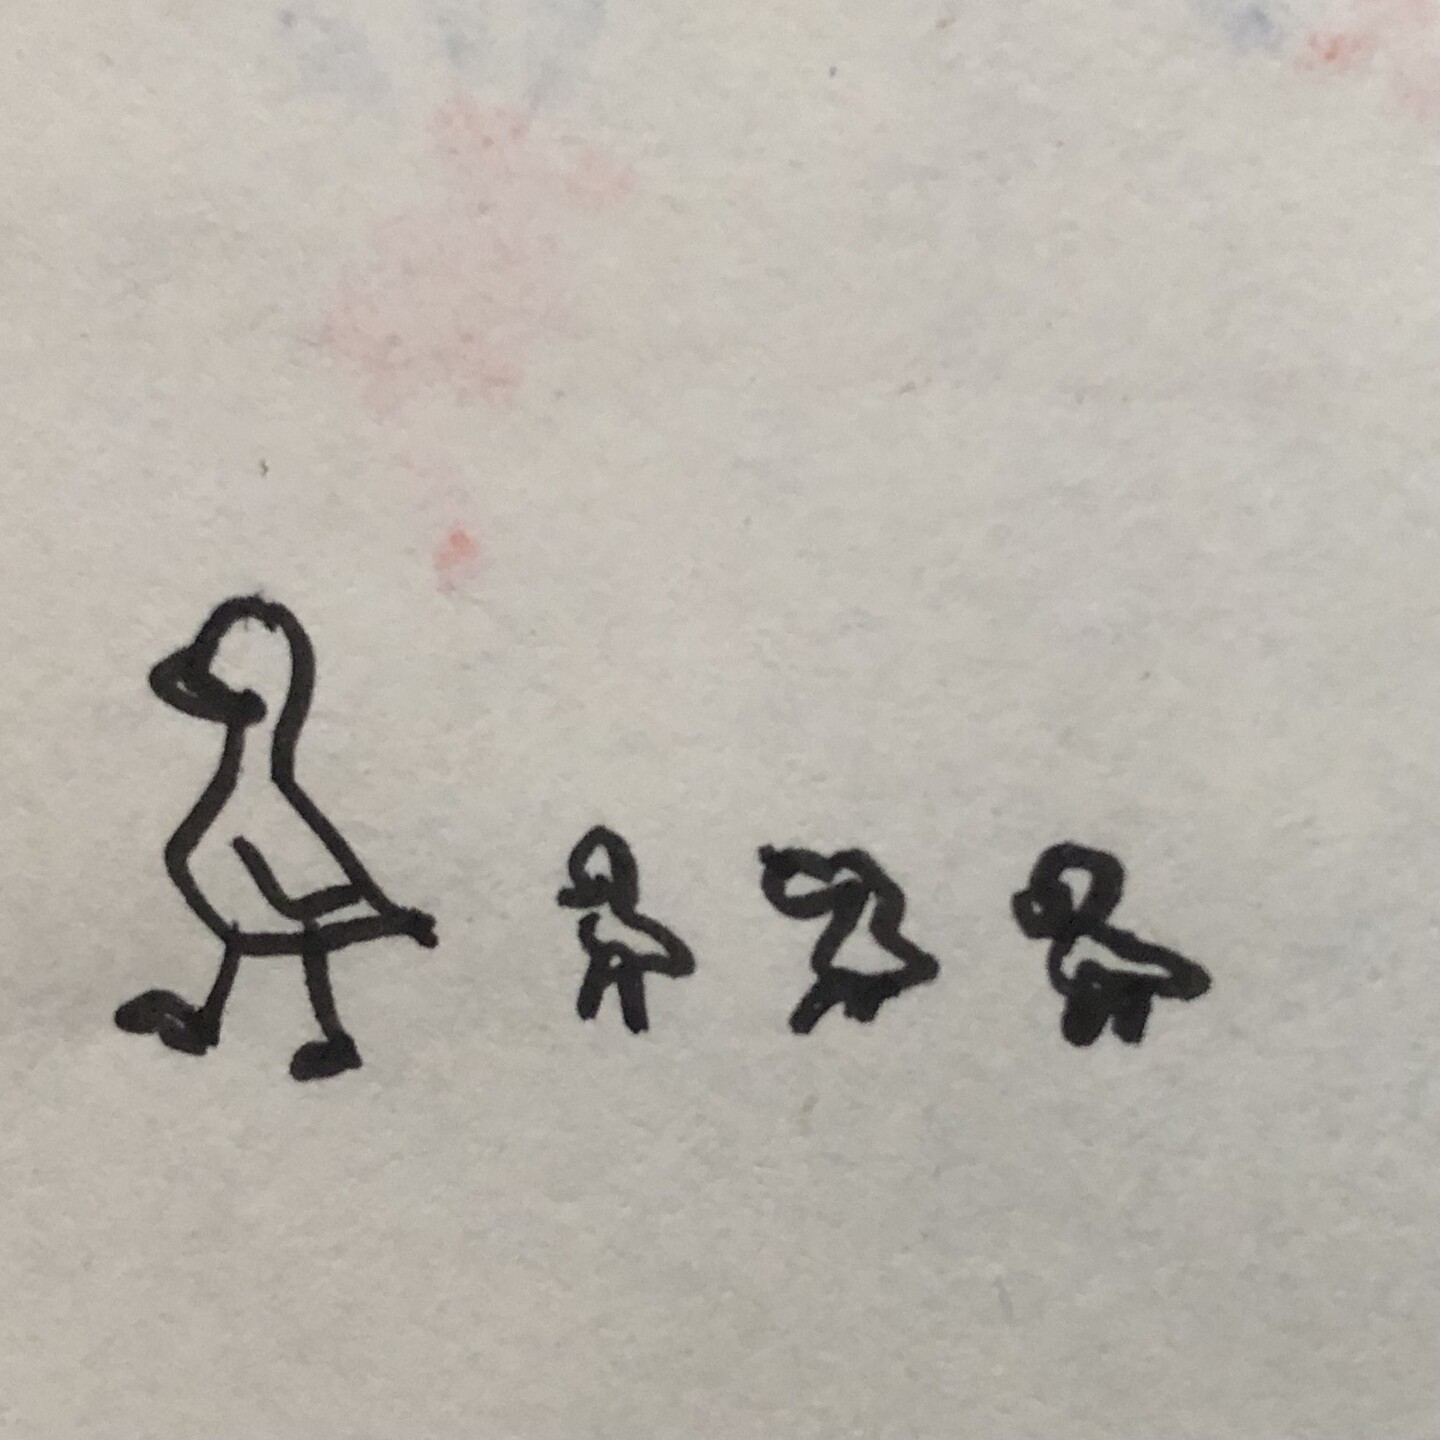 Poorly drawn mama duck followed by 3 poorly drawn ducklings.